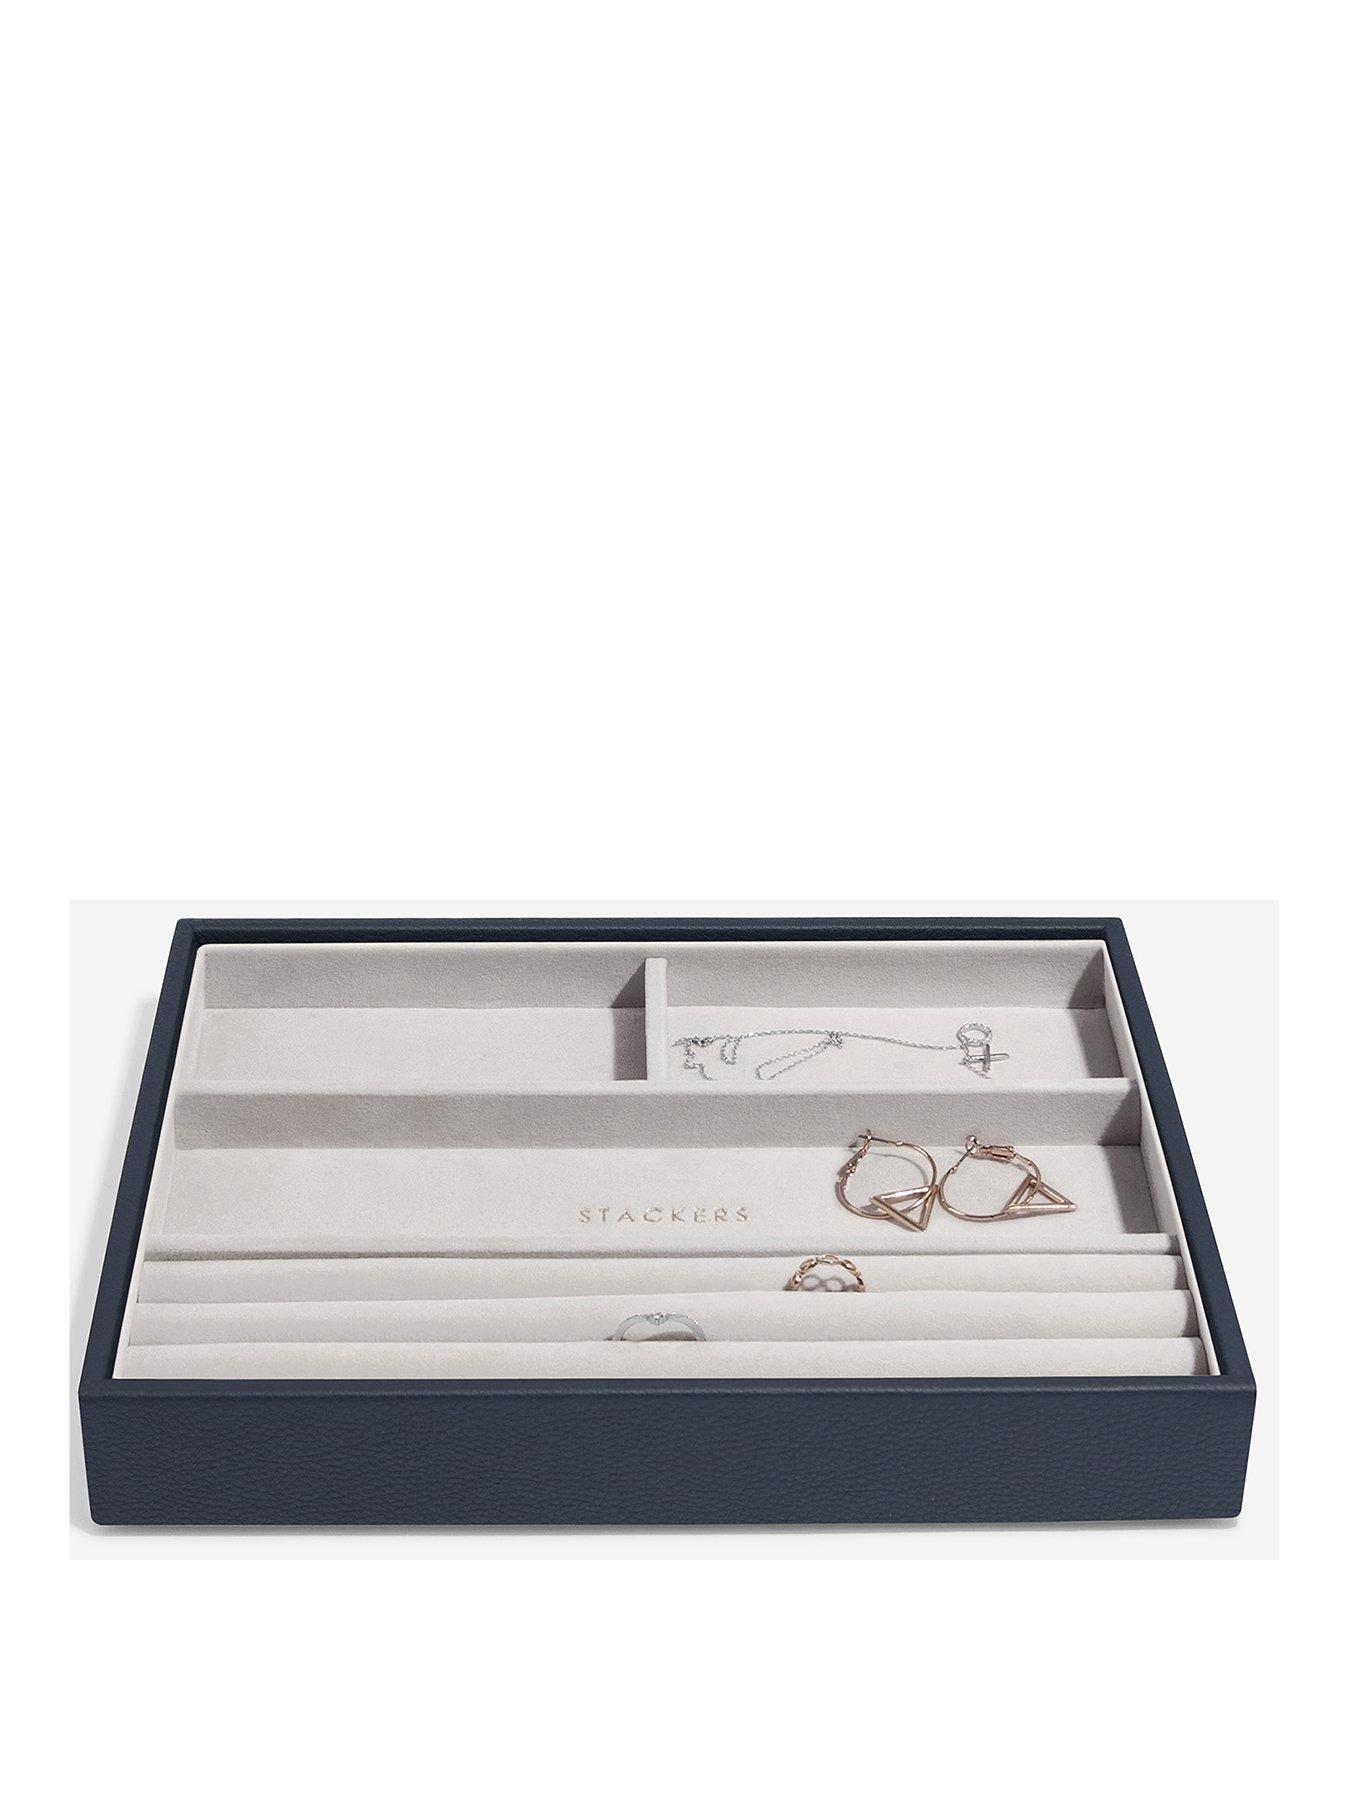 Shop Stackers, Stackable Jewellery Box